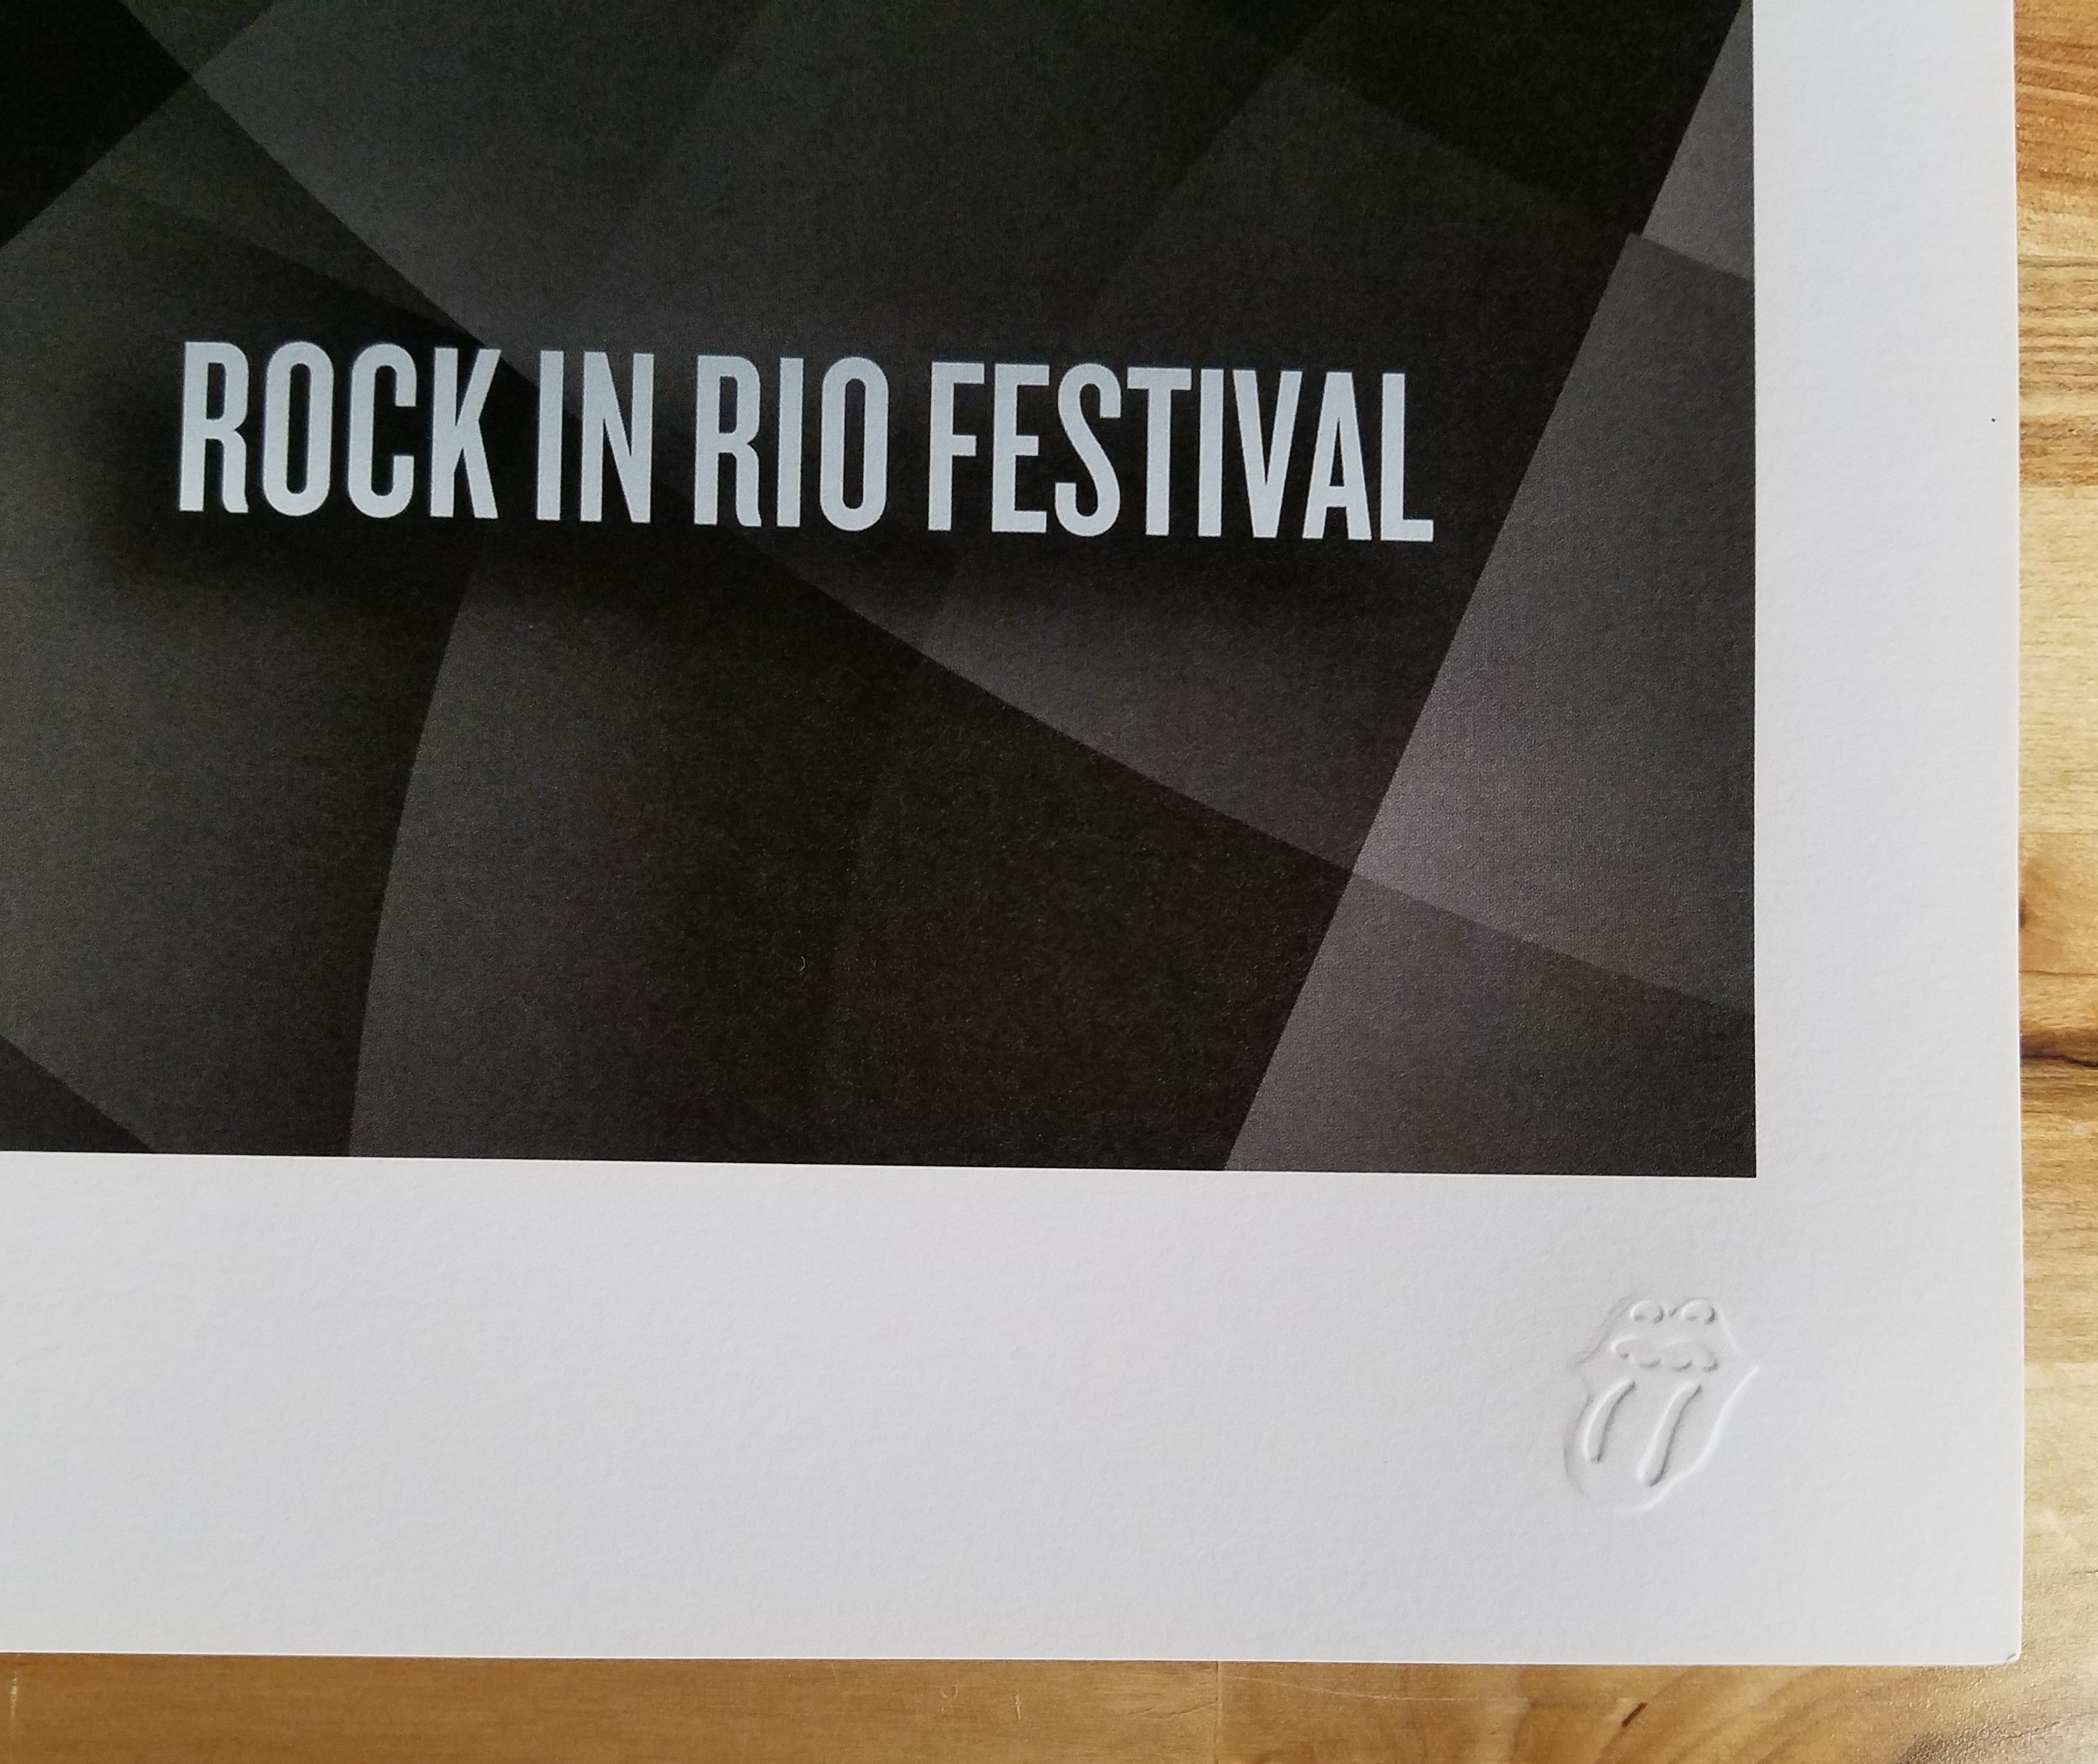 Title: Rolling Stones  - 2014 OFFICIAL POSTER LISBON #2 ROCK IN RIO  Poster artist:   Edition:  xx/500  Type: Limited edition lithograph   Size: 17" x 23"  Location: Lisbon, Portugal   Venue:  Rock in Rio Festival   Notes:  1st edition, official poster hand numbered and embossed.  Official poster, Europe 14 On Fire Tour original from the show!